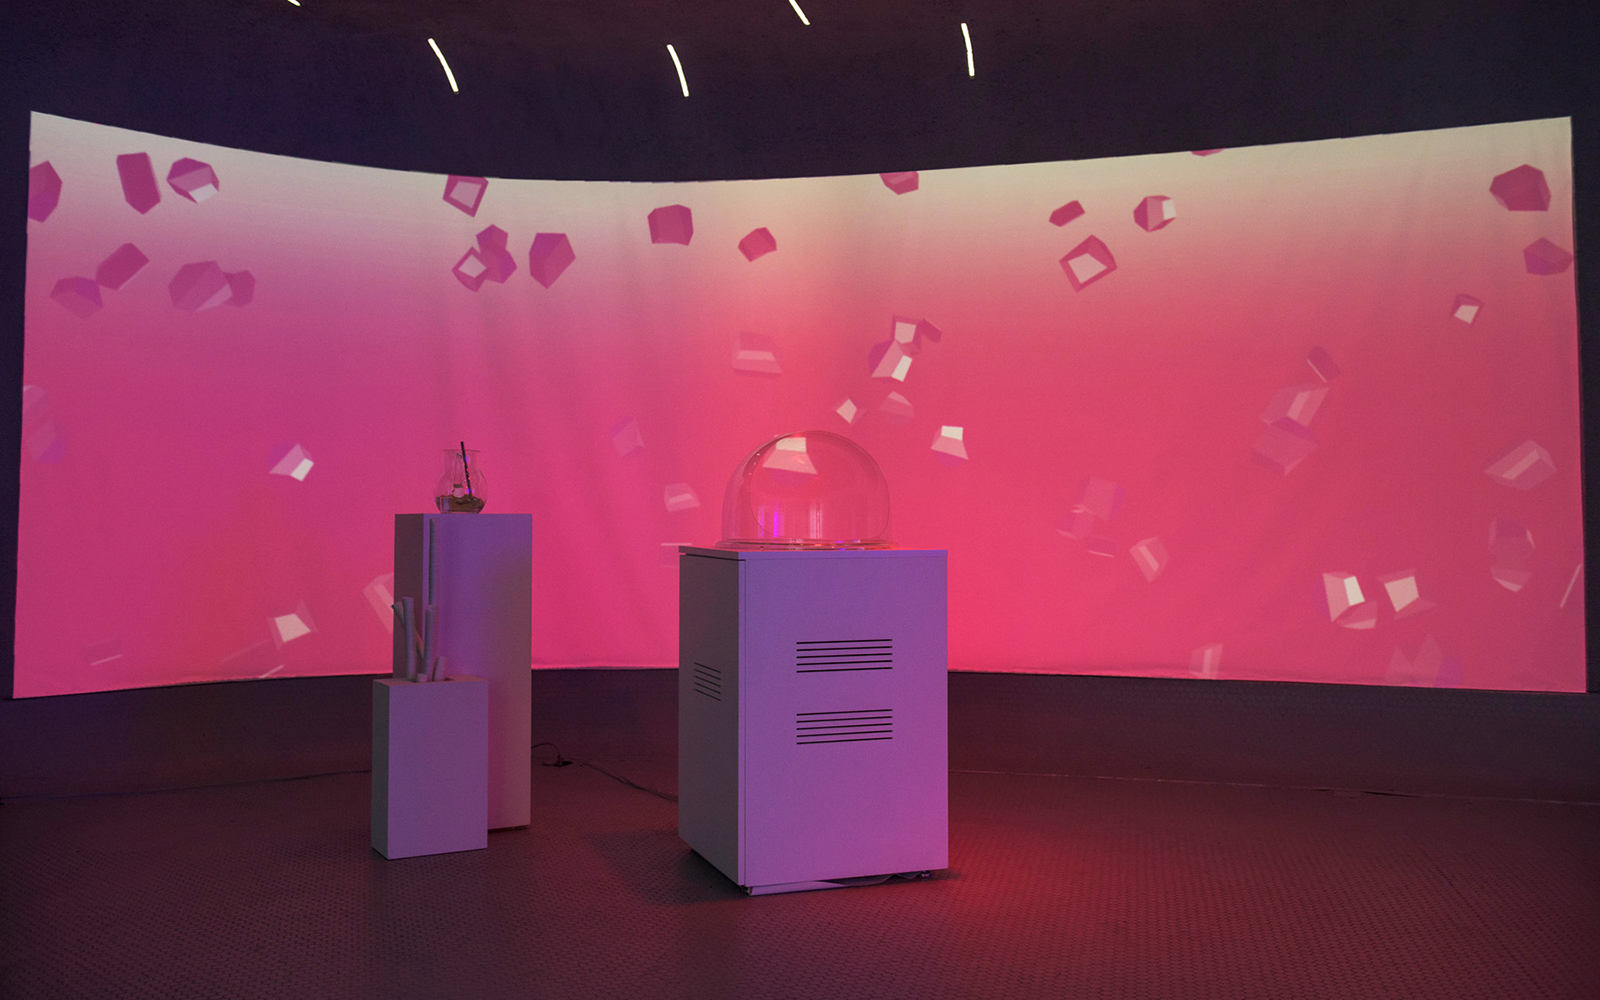 The New Museum’s Incubator Celebrates the Millennial-Tech Lifestyle